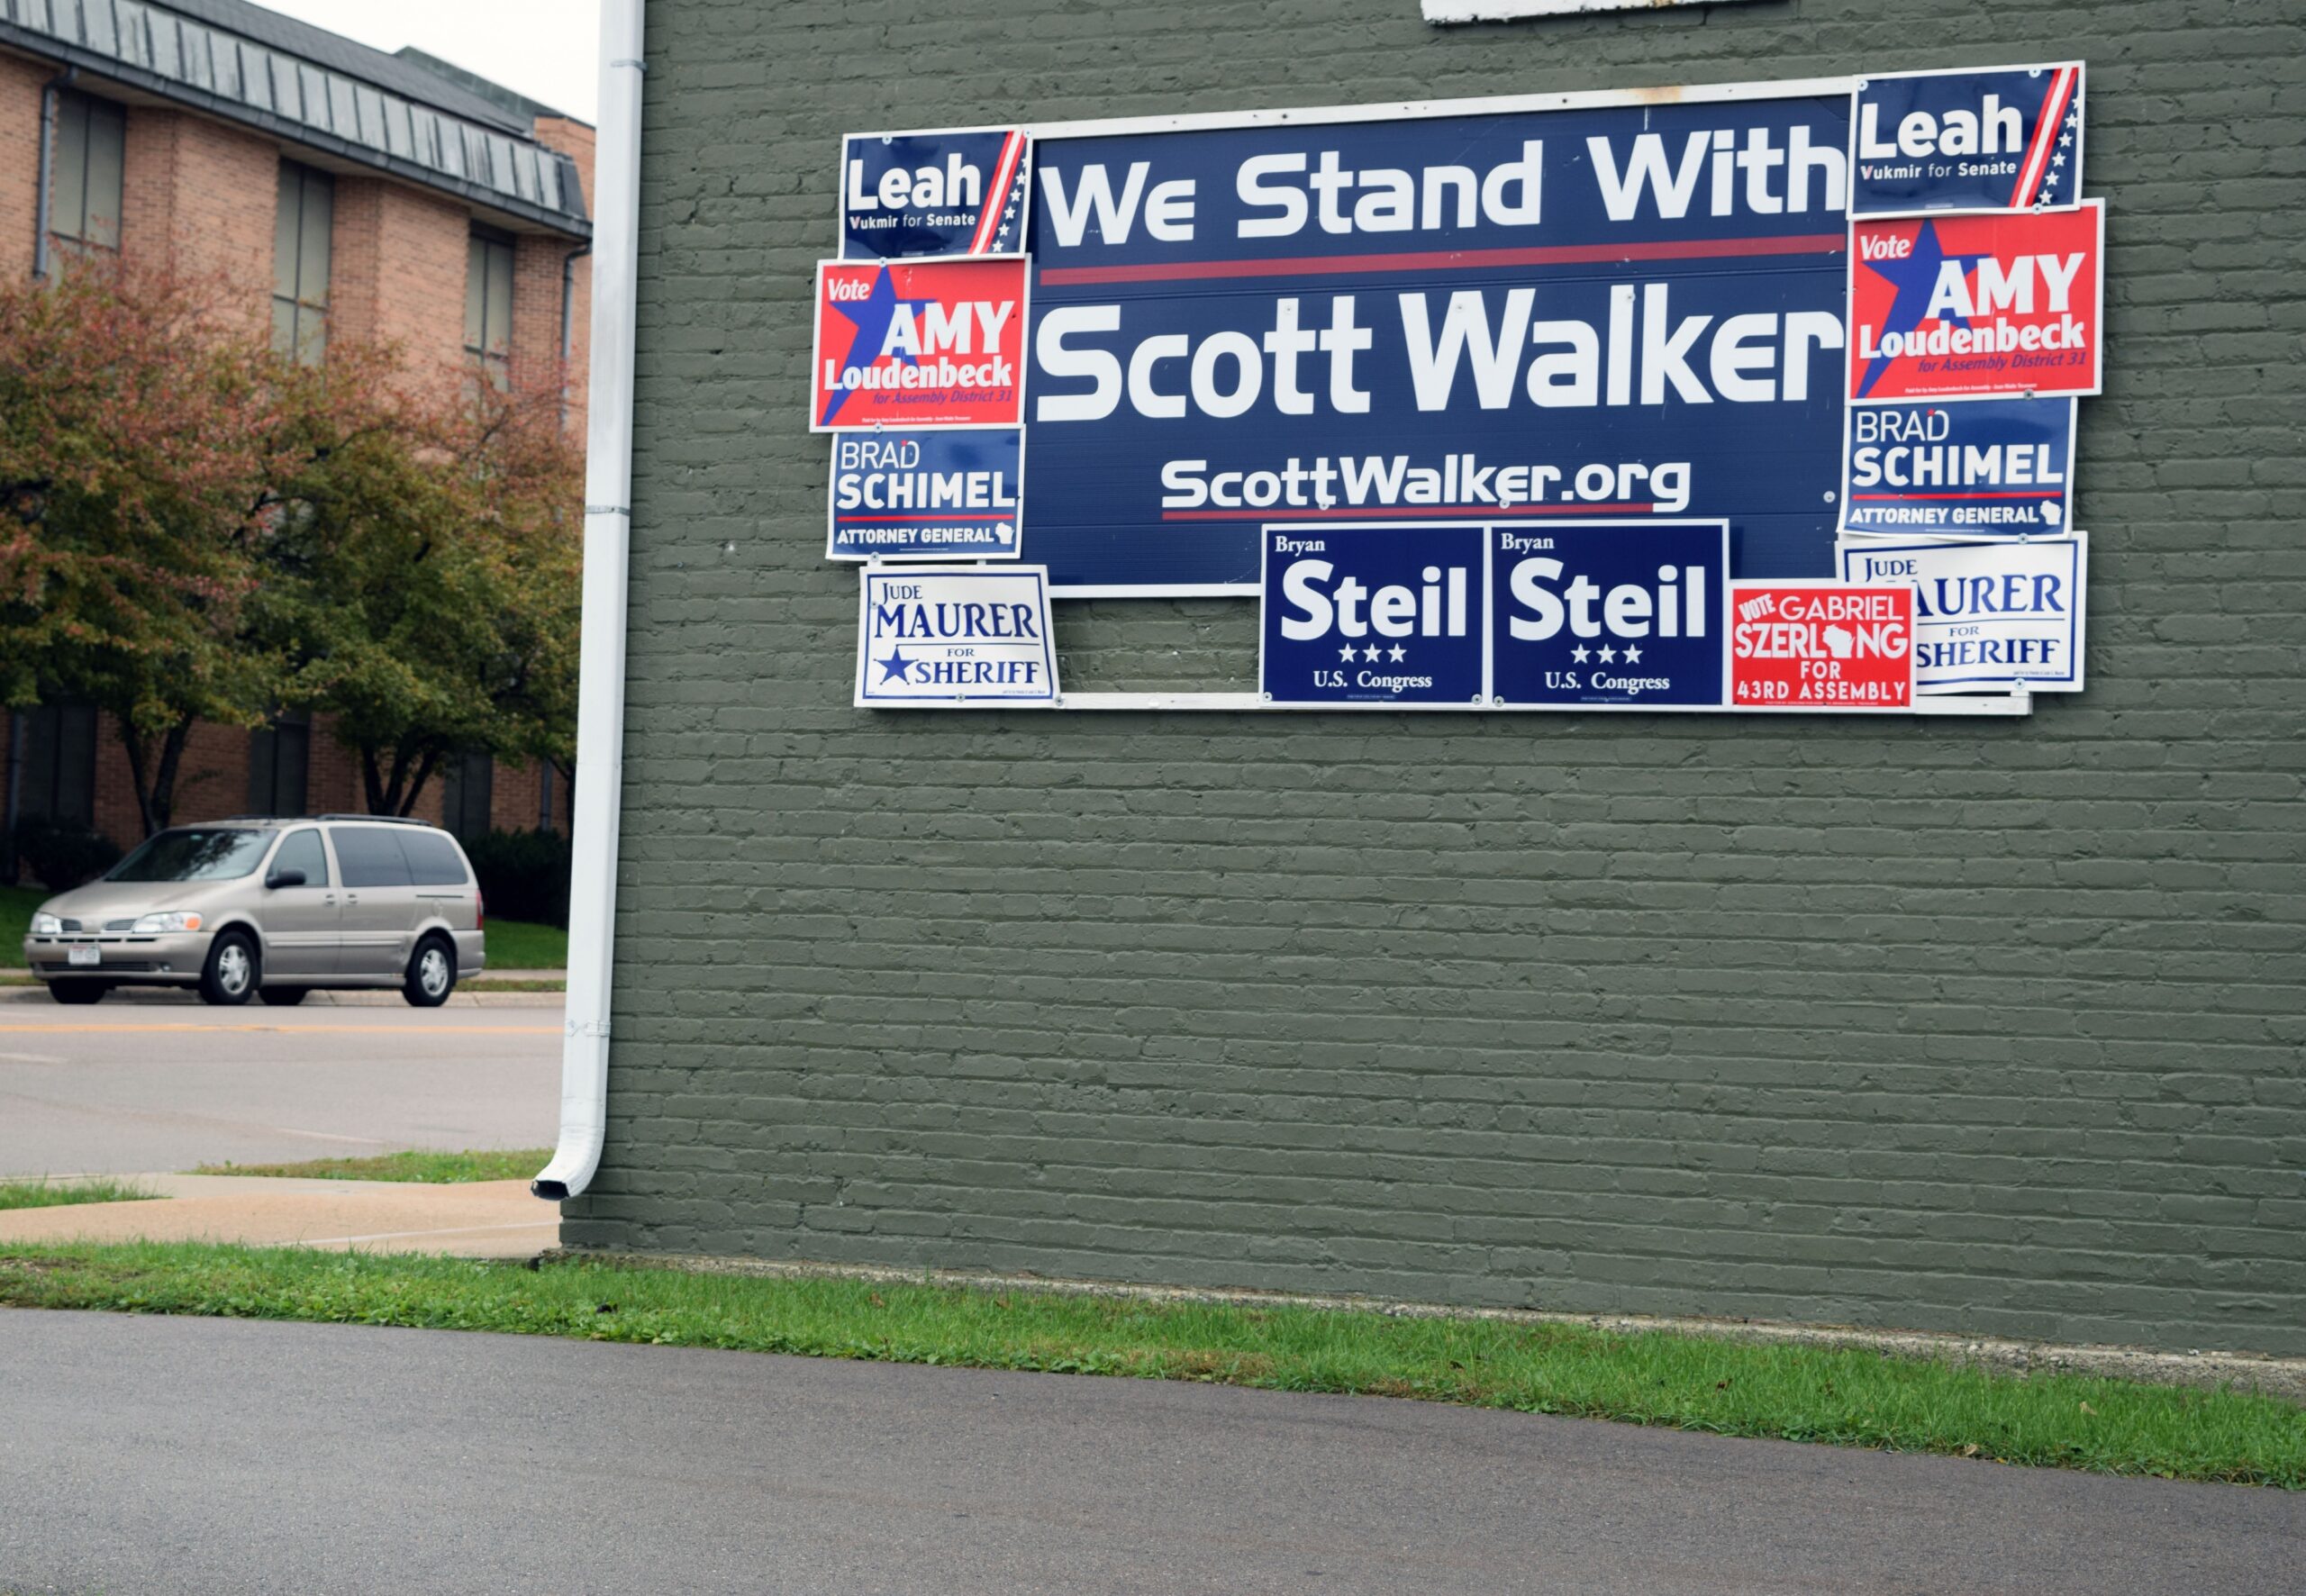 Campaign signs for Republican candidates